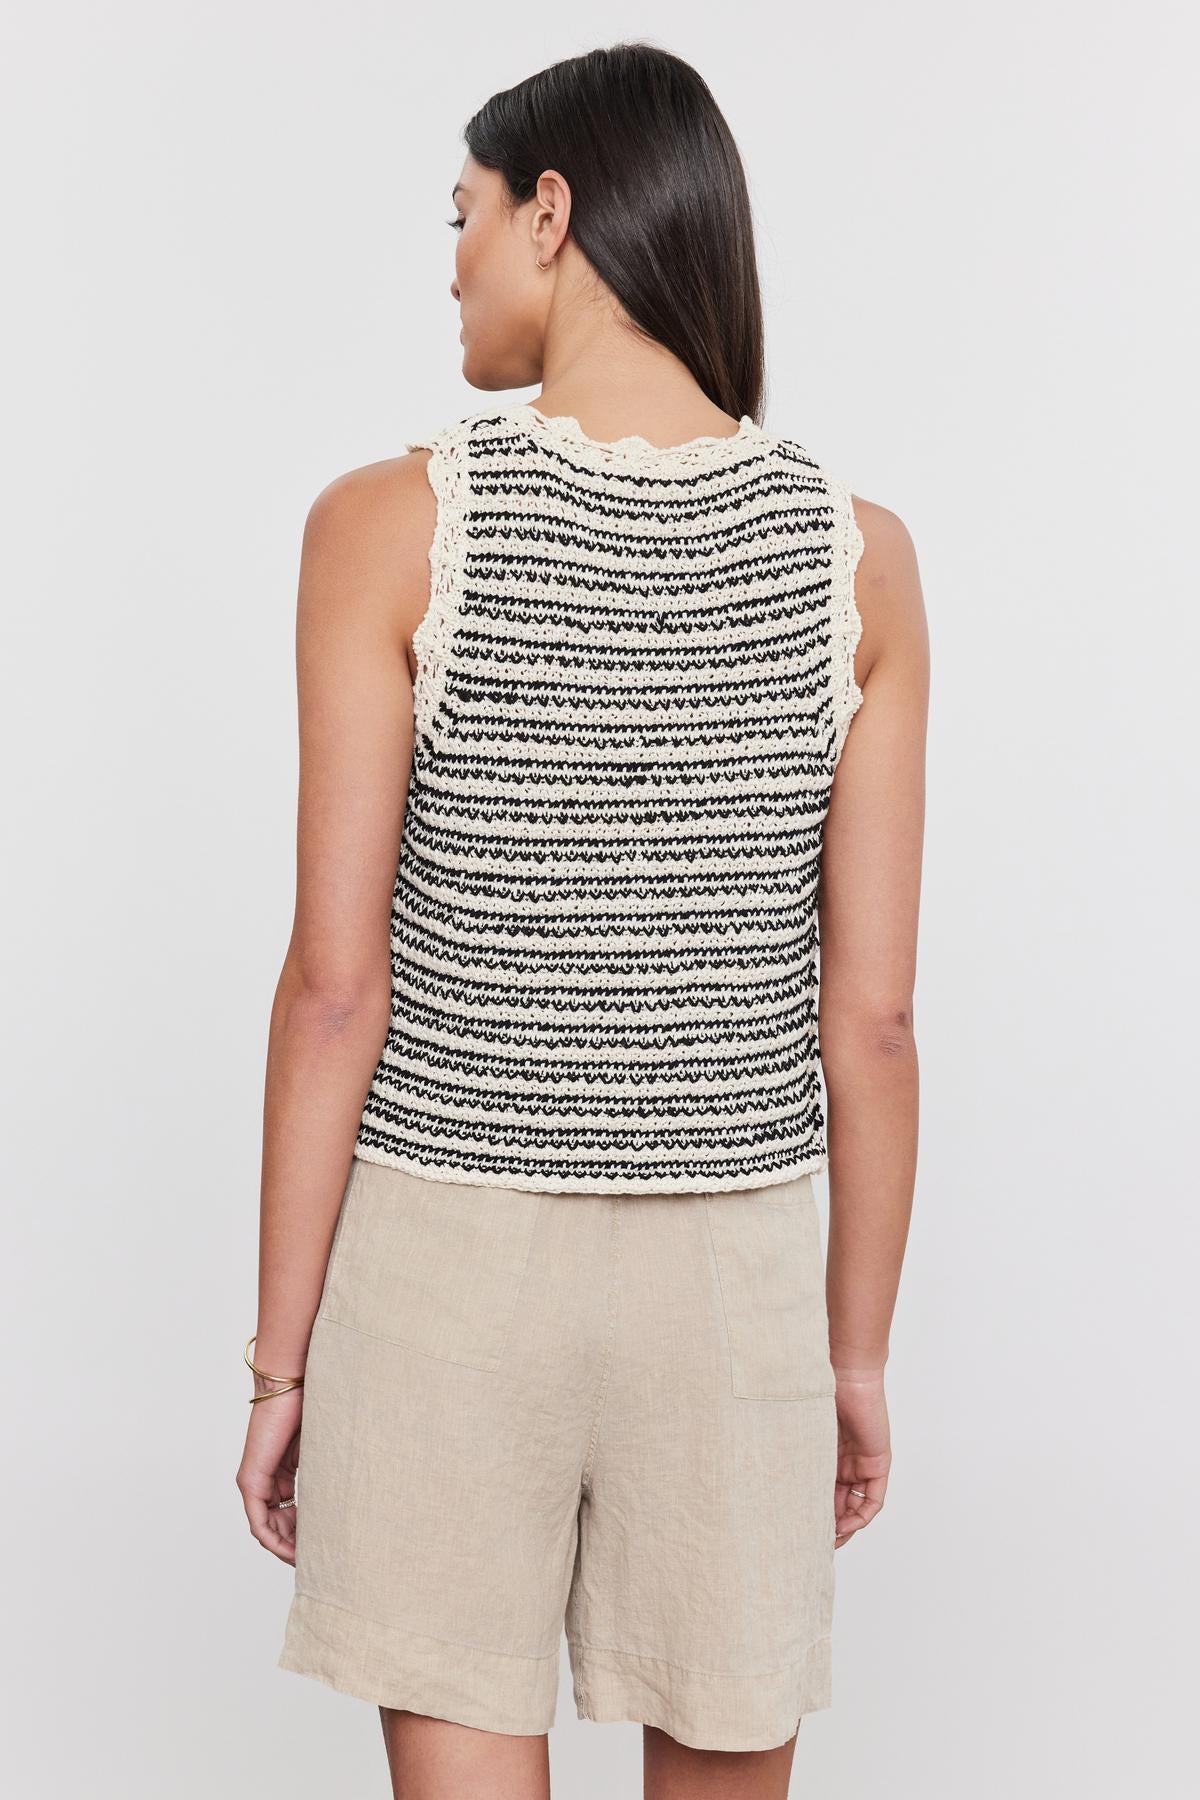 Woman standing with her back to the camera, wearing a black and white striped SOPHIE SWEATER VEST sleeveless top with a crew neckline and beige shorts by Velvet by Graham & Spencer.-36910013743297